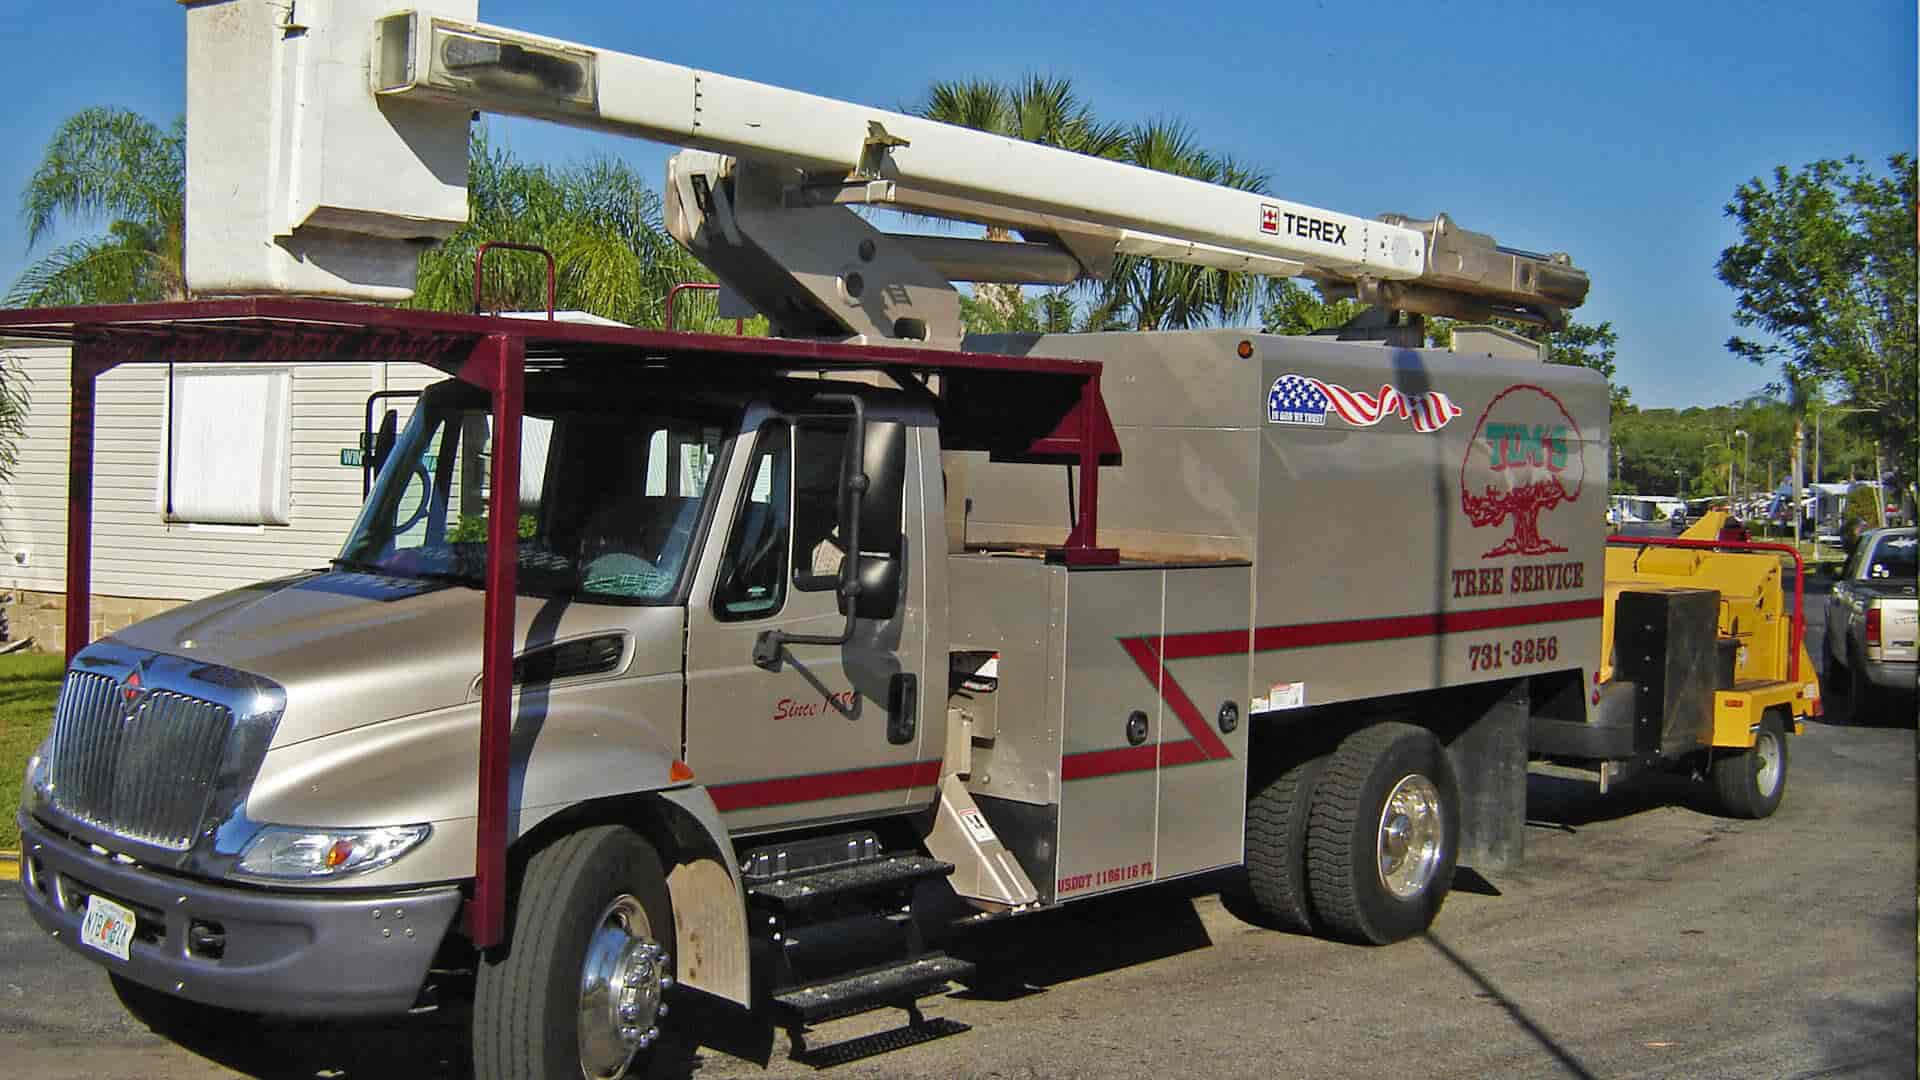 Tree services boom truck in Lee County, FL.